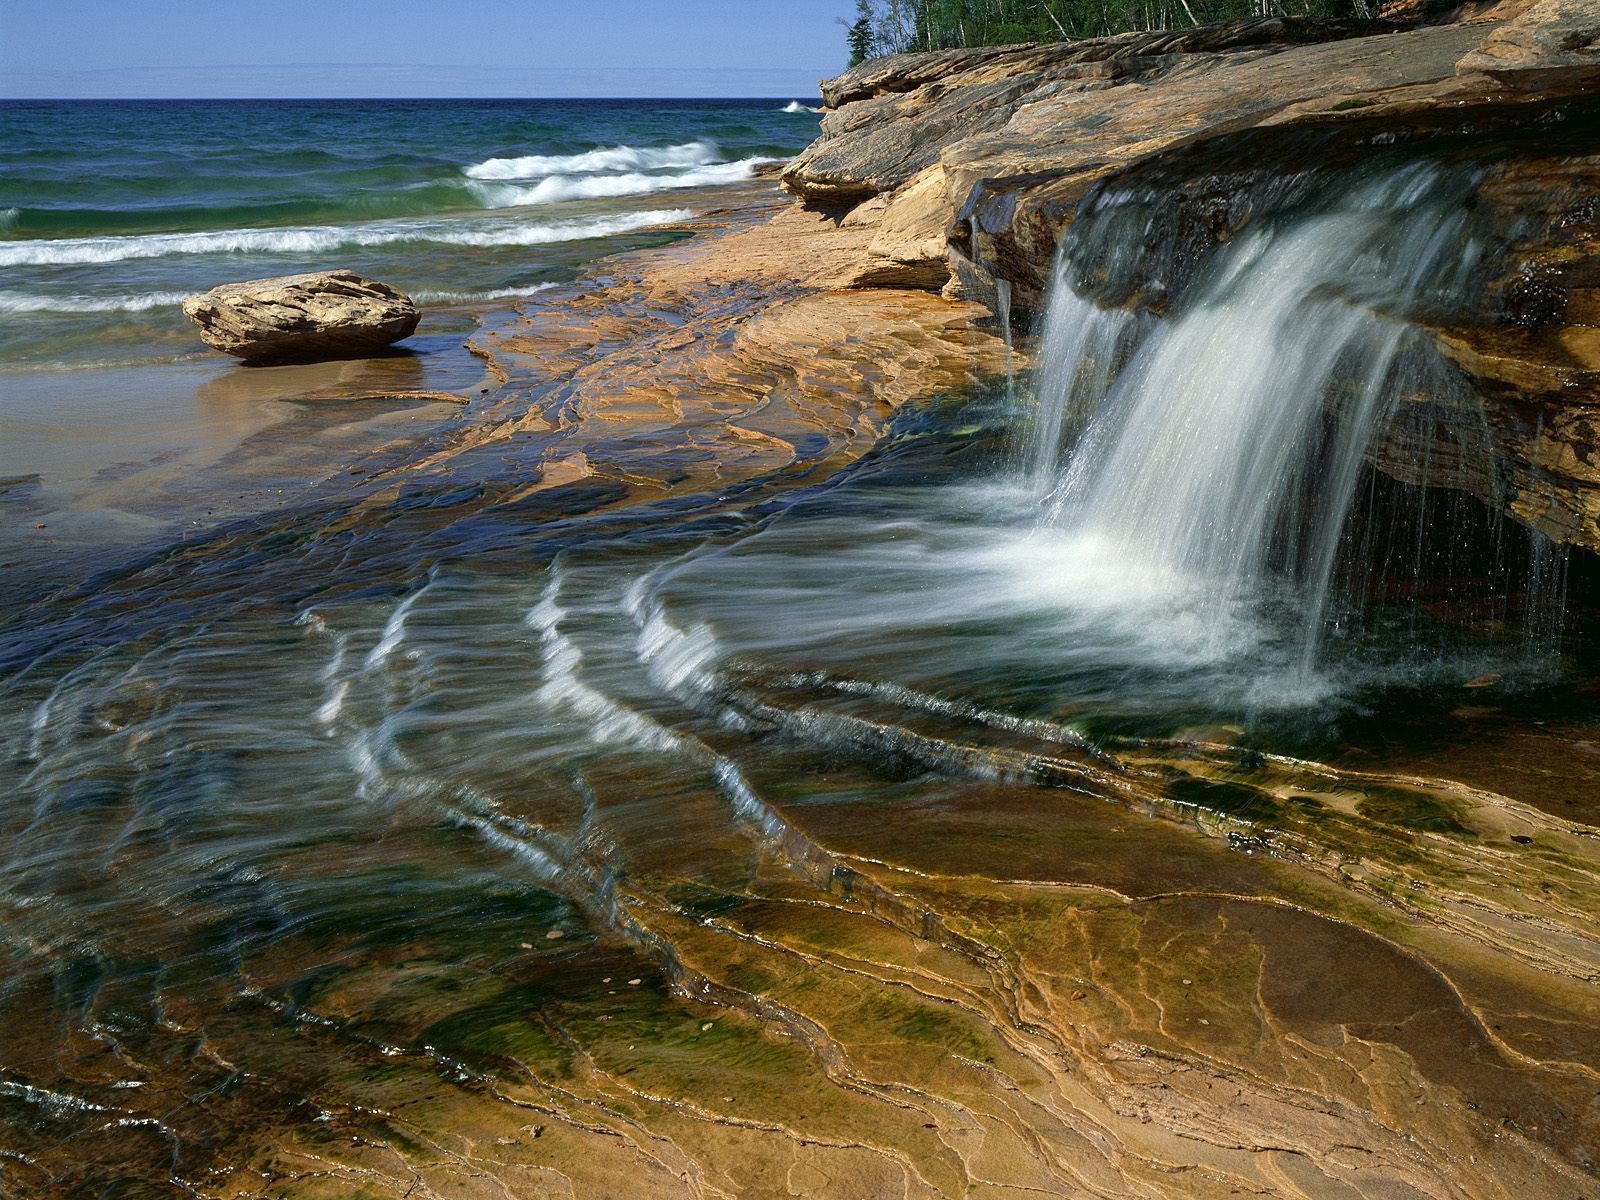 Download High quality Miners Beach, Lake Superior, Pictured Rocks National Lakeshore, Michigan Beaches wallpaper / 1600x1200